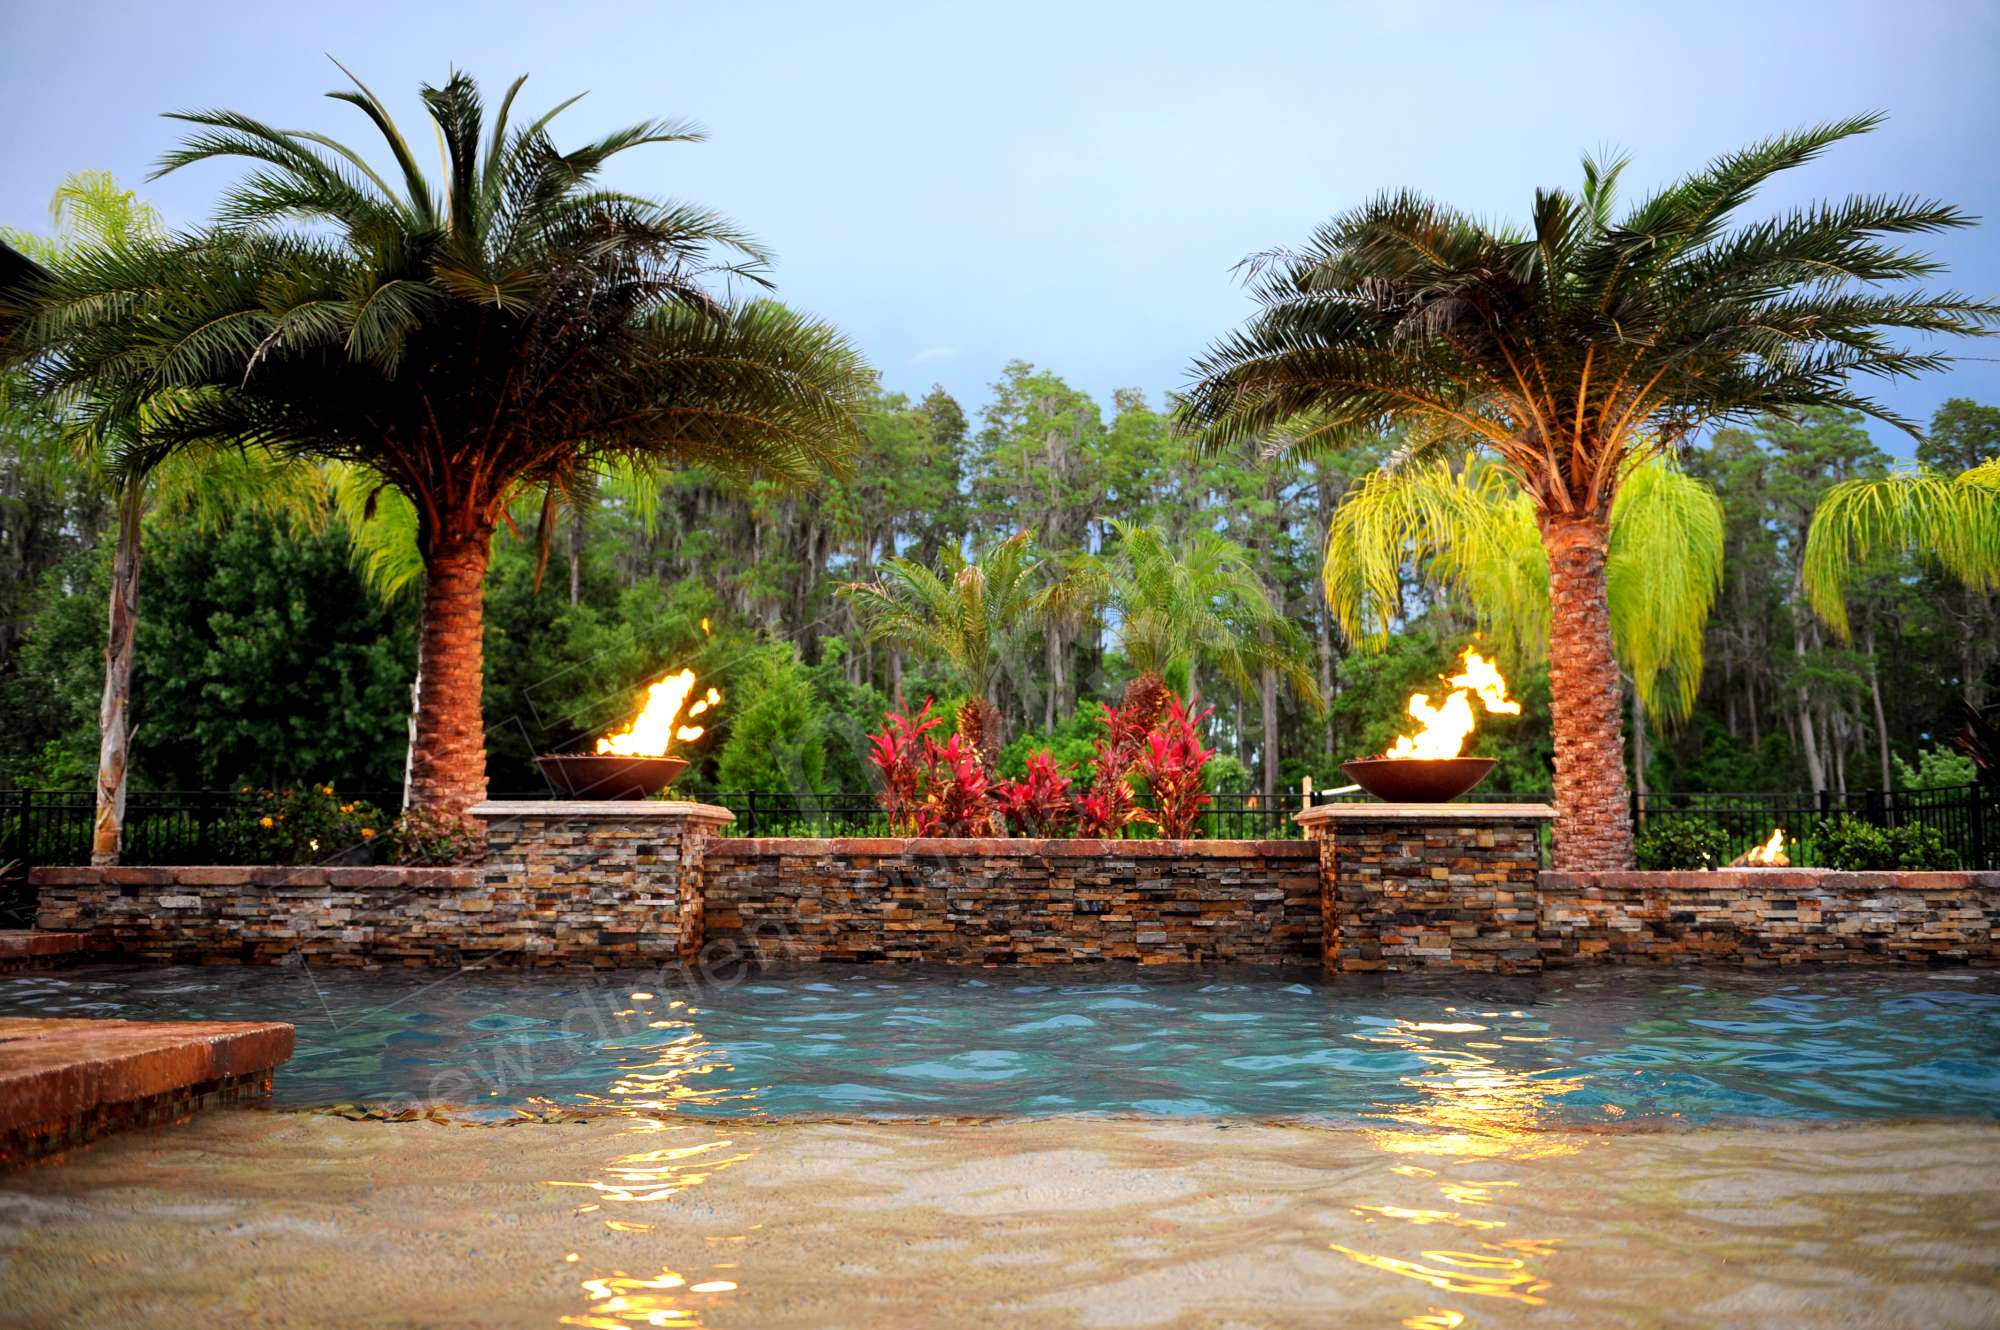 Fire bowls surrounding the spillway on a pool